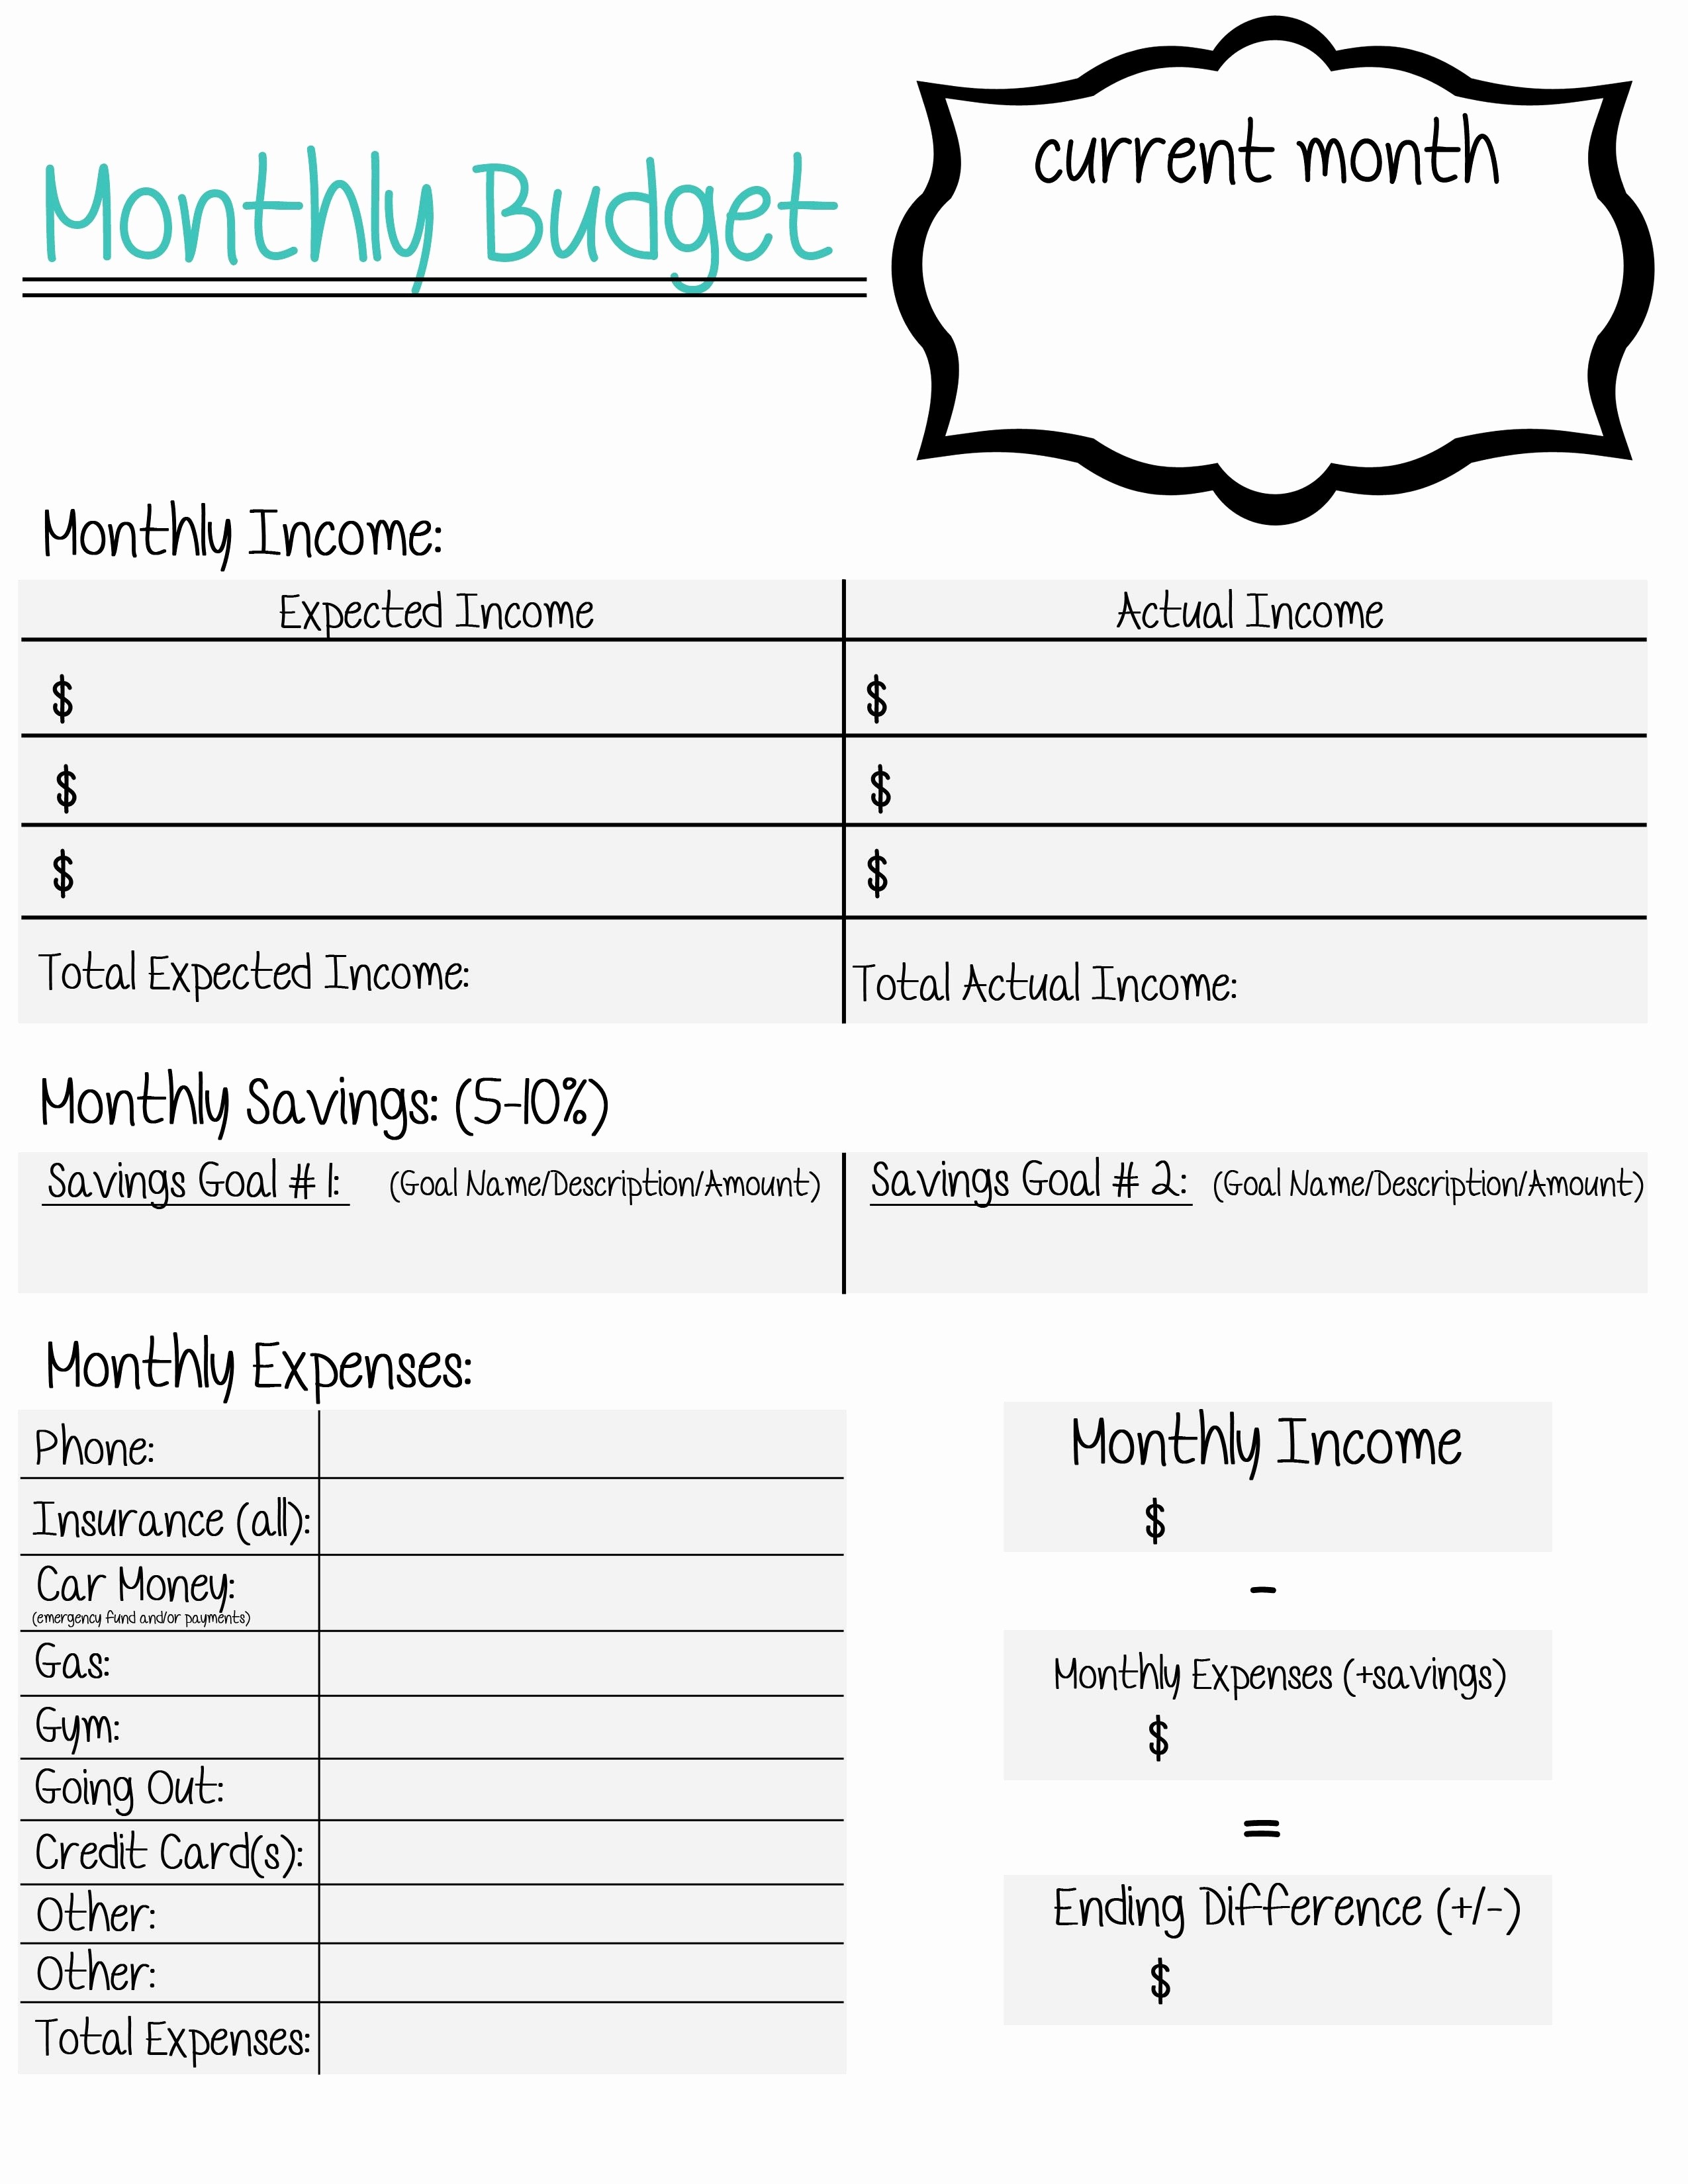 Monthly Budget Spreadsheet Dave Ramsey Unique Free Bud Document Printable